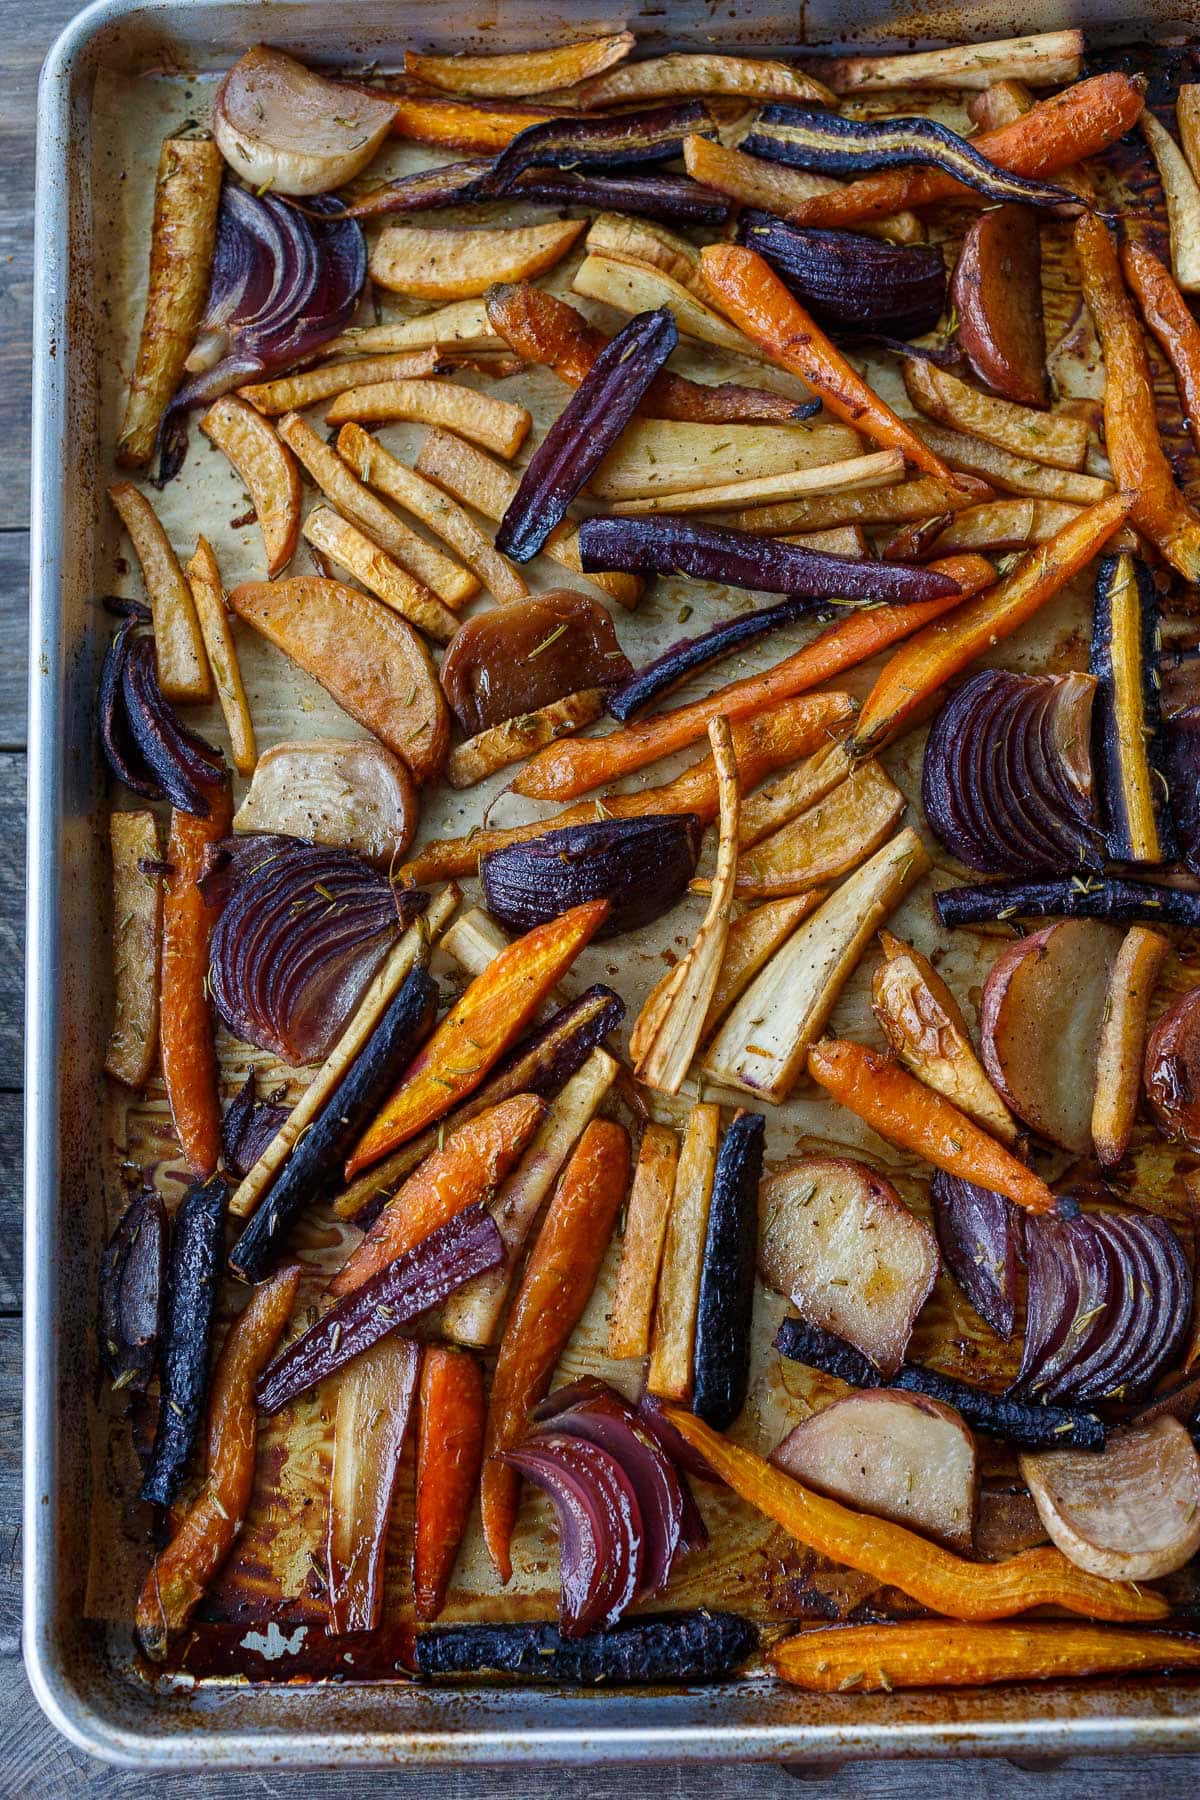 Roasted vegetables on a tray.